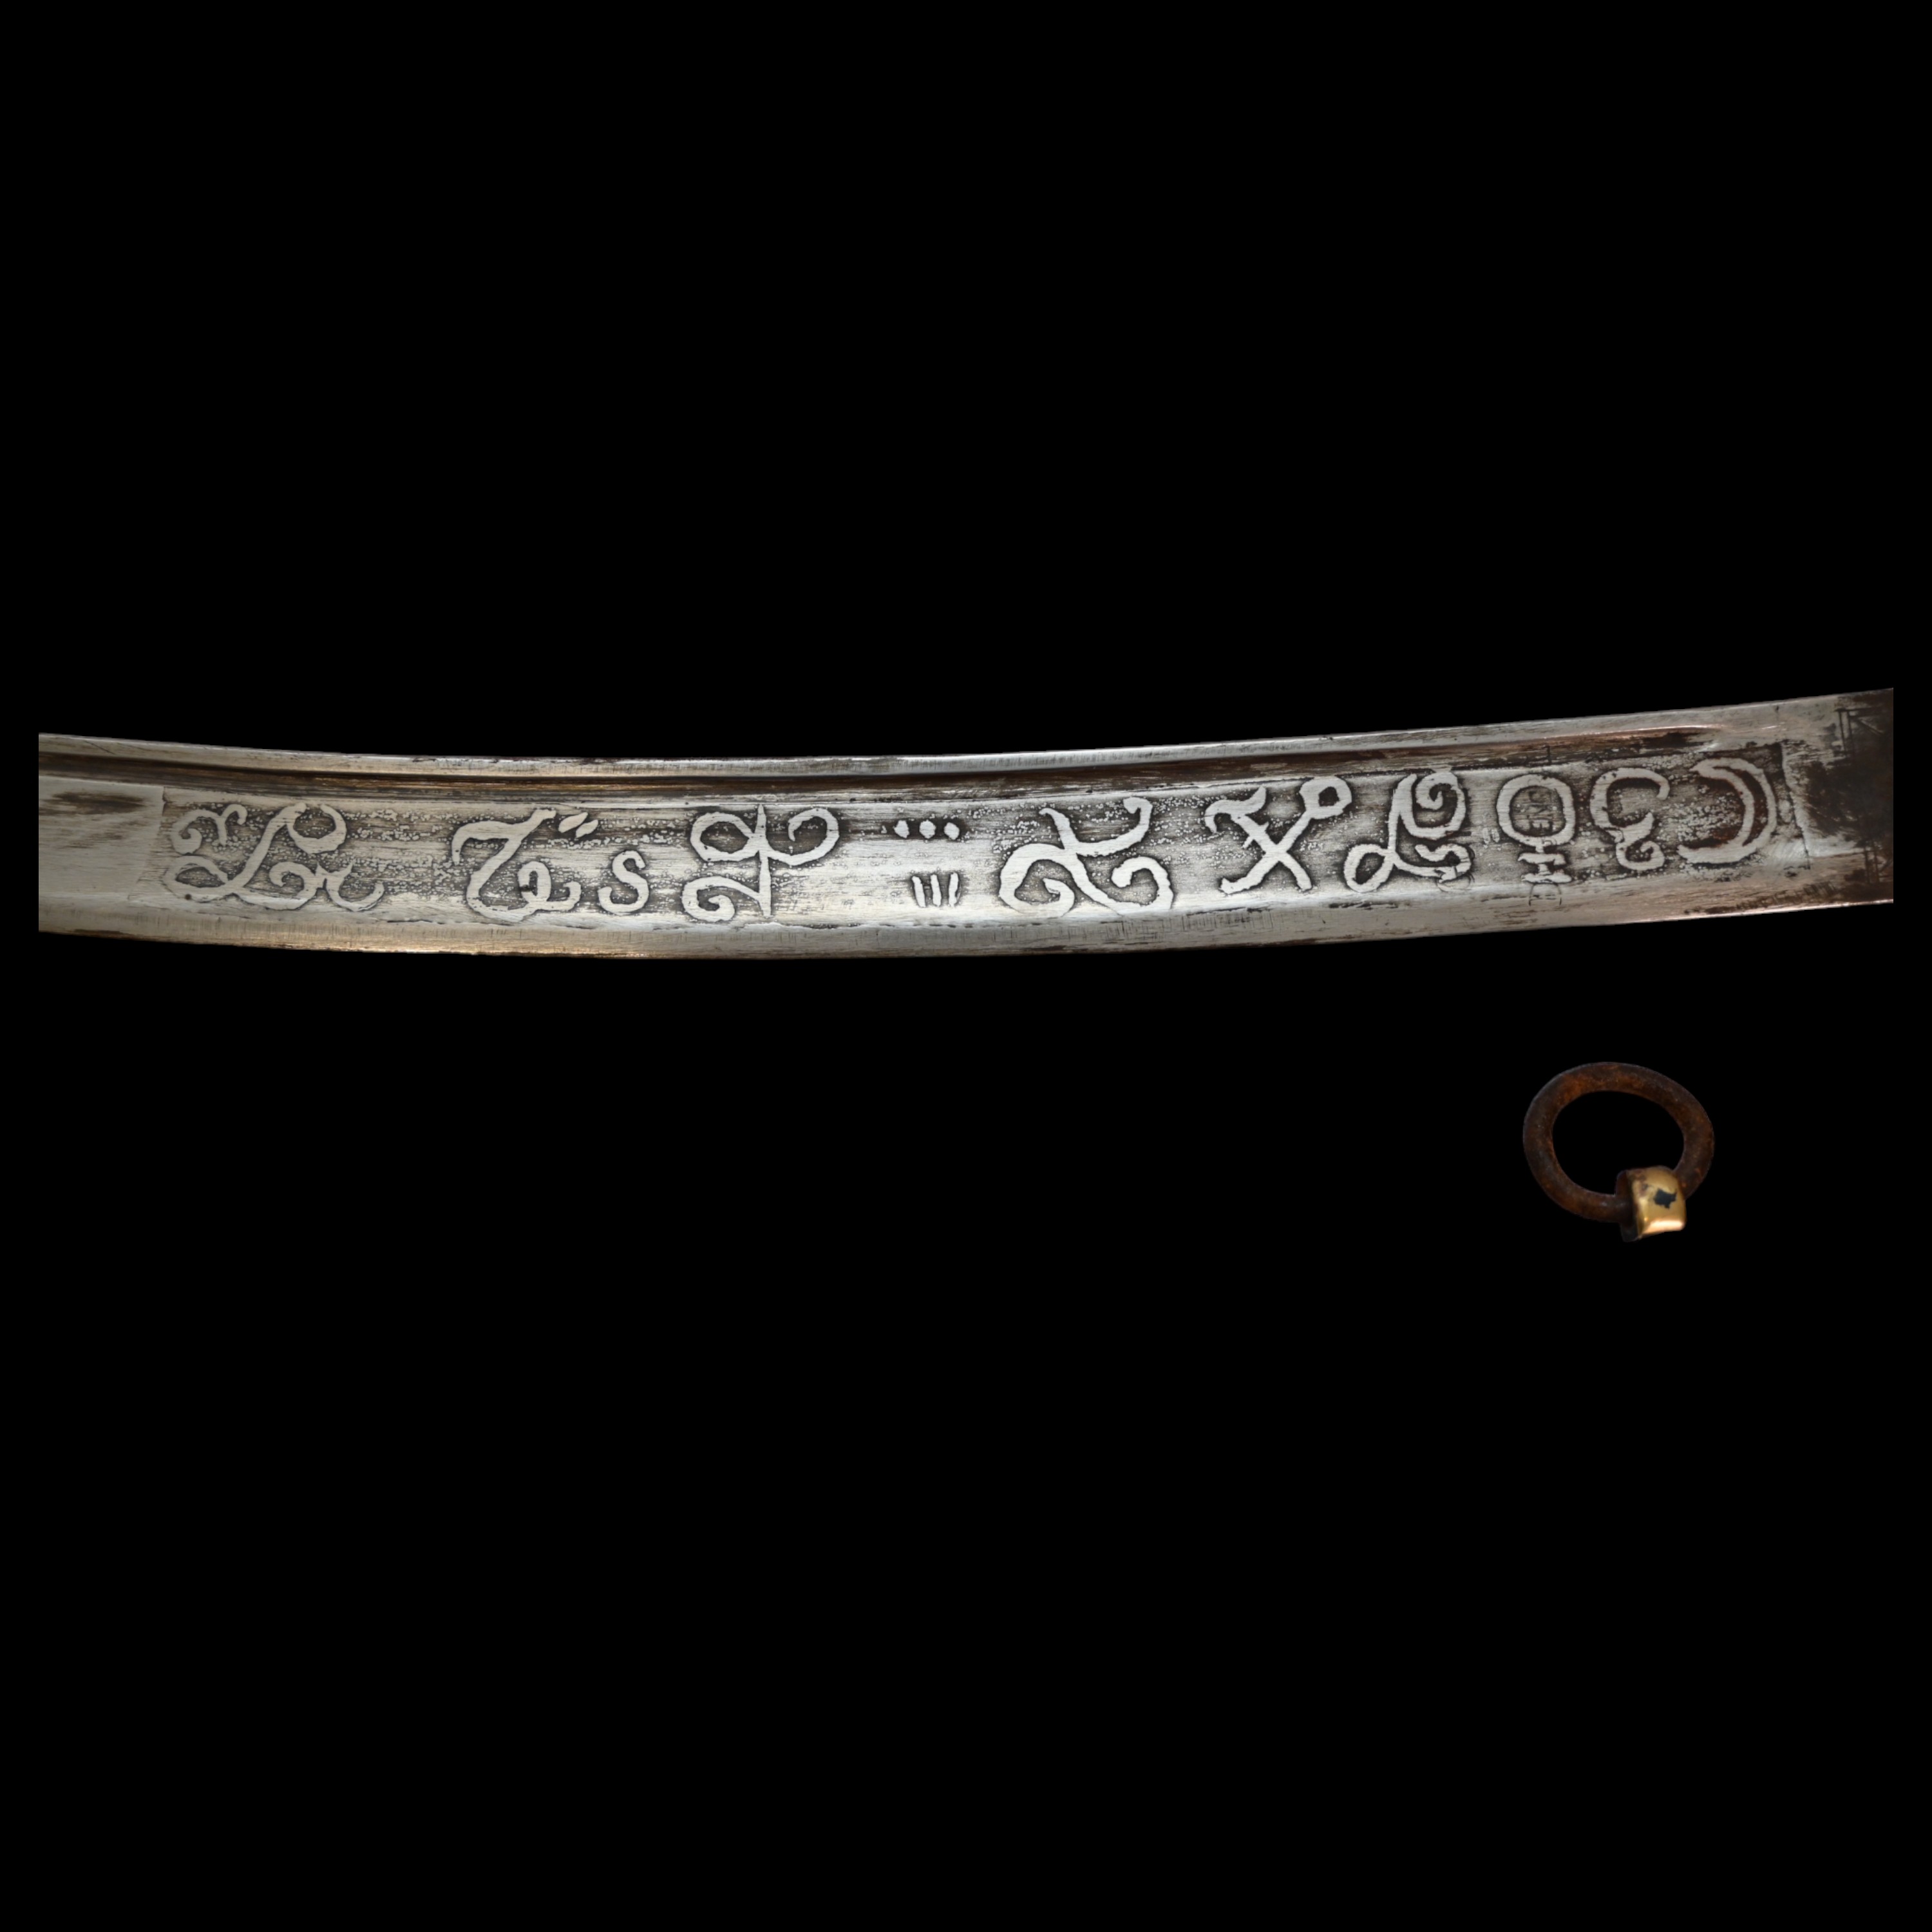 Hussar sabre, France, First Empire period, early 19th century. - Image 7 of 11